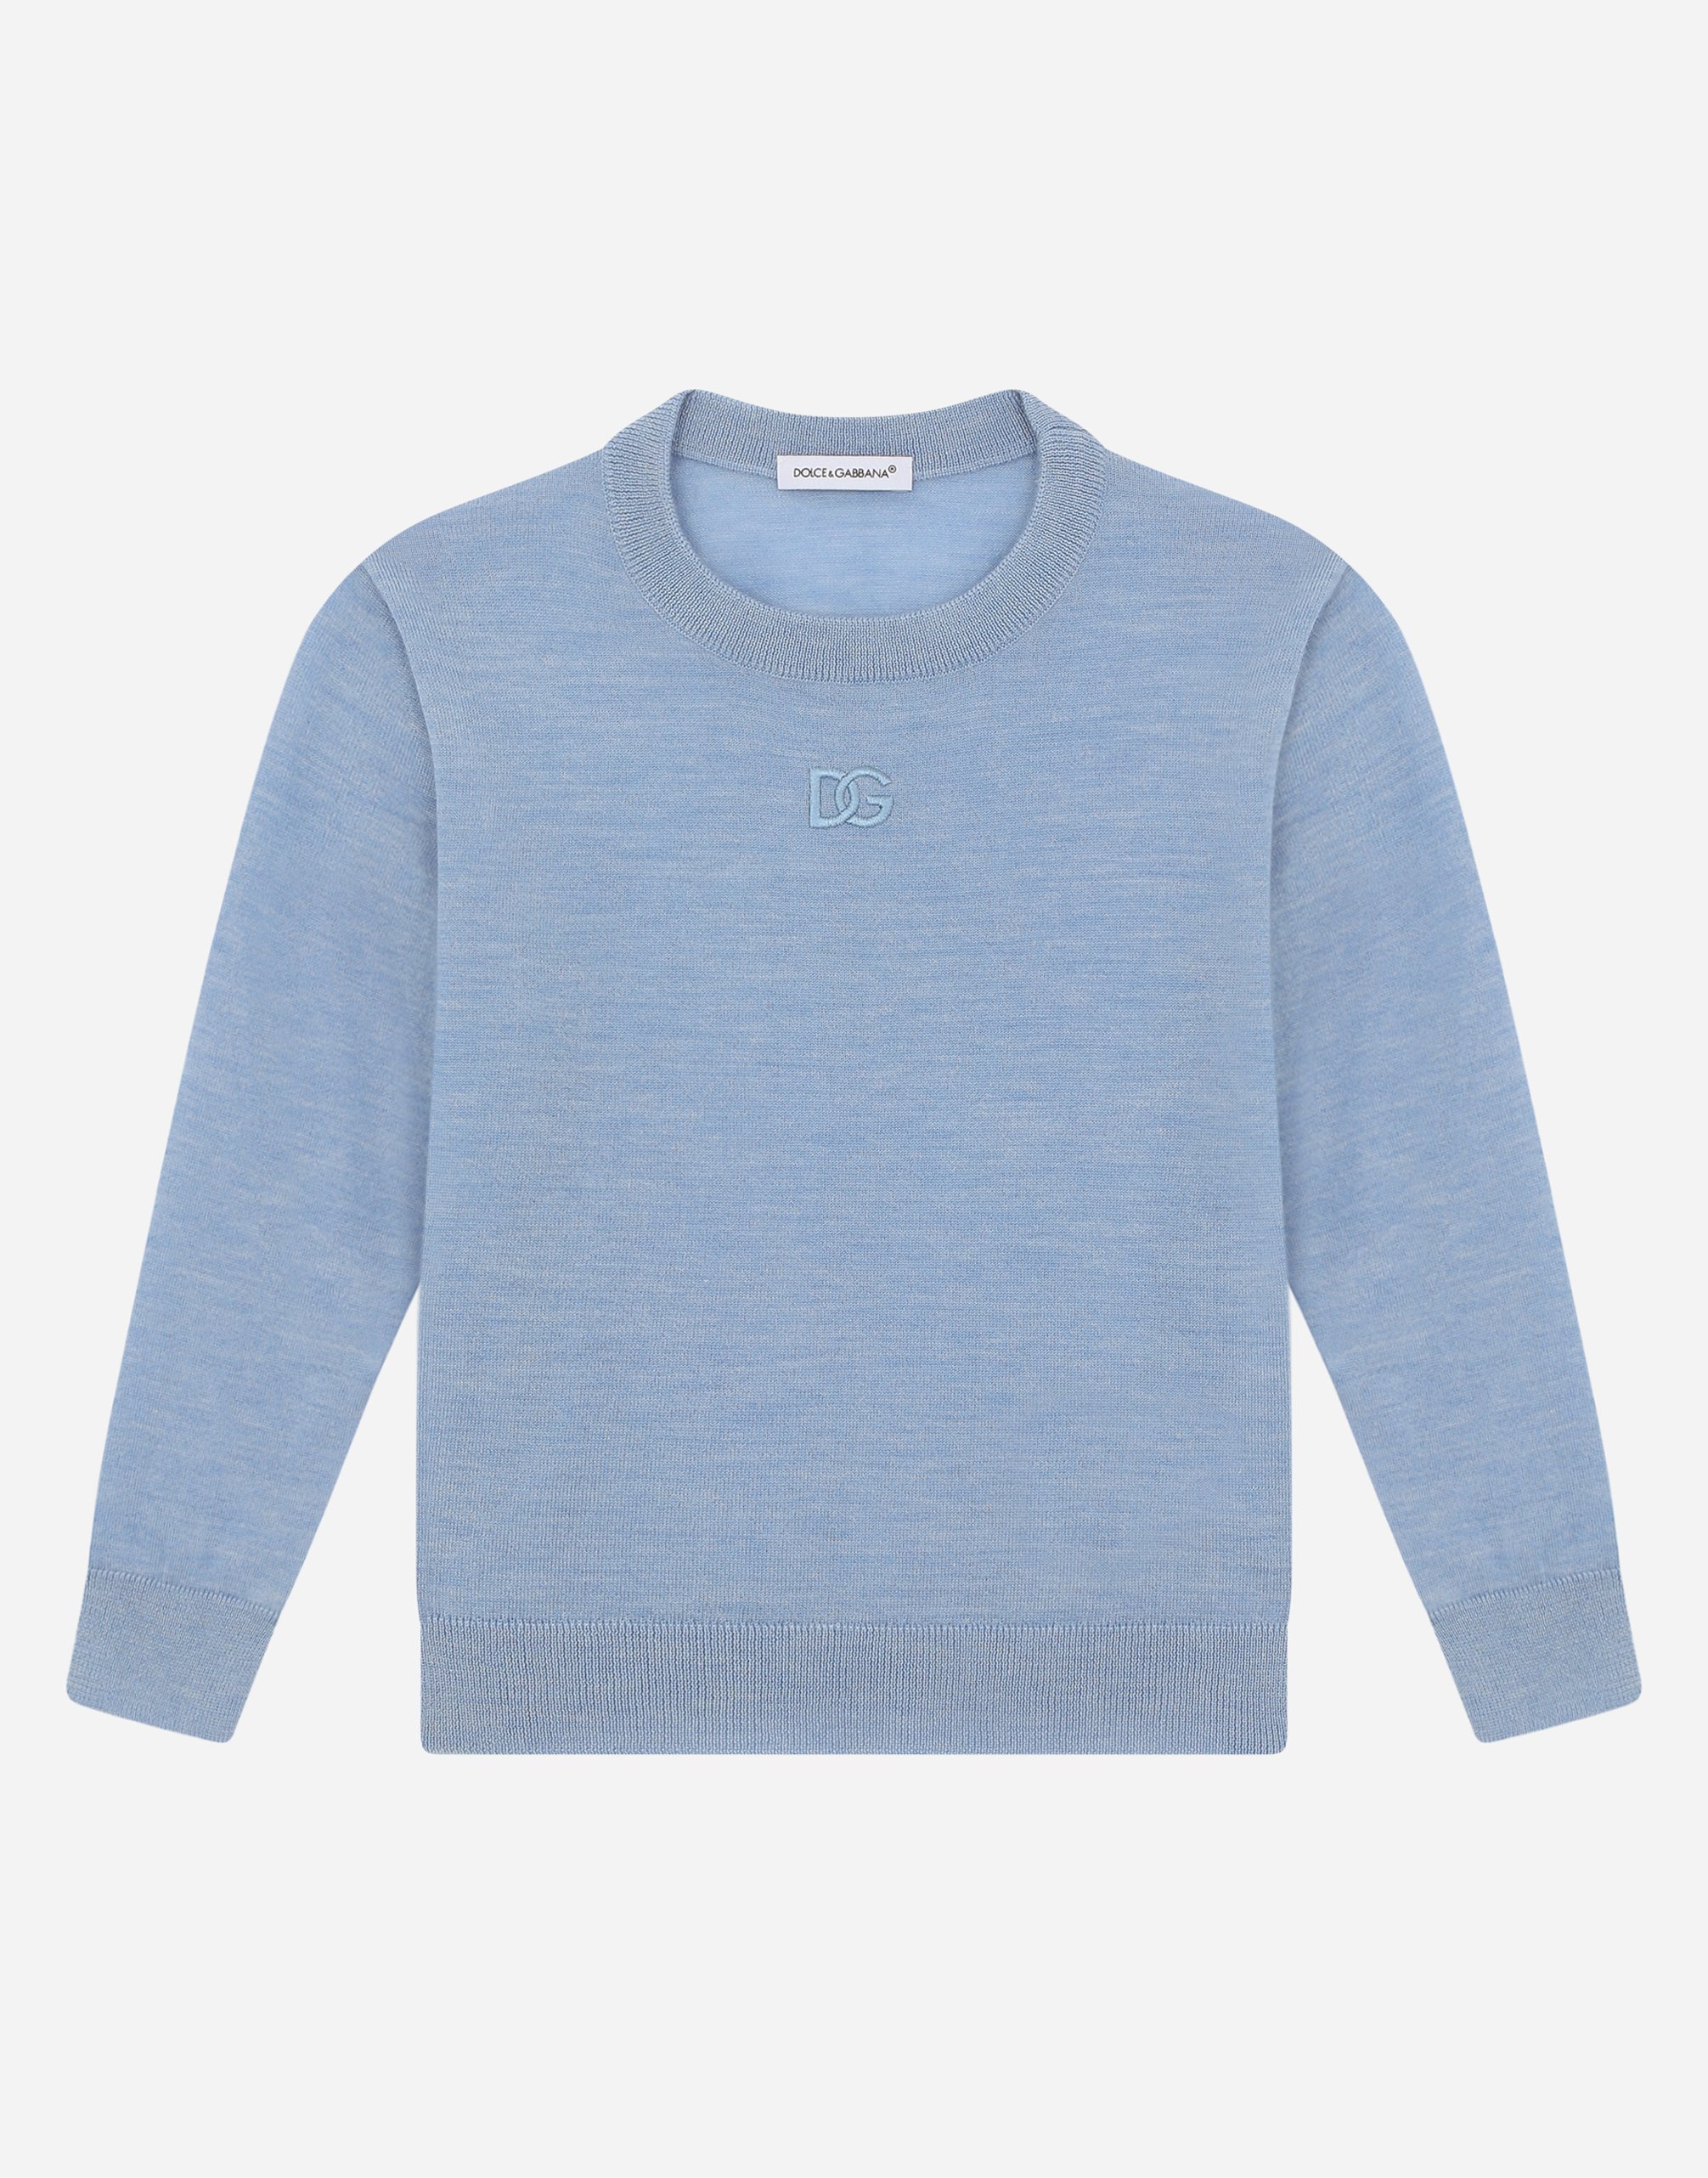 Cashmere round-neck sweater with DG logo embroidery in Azure